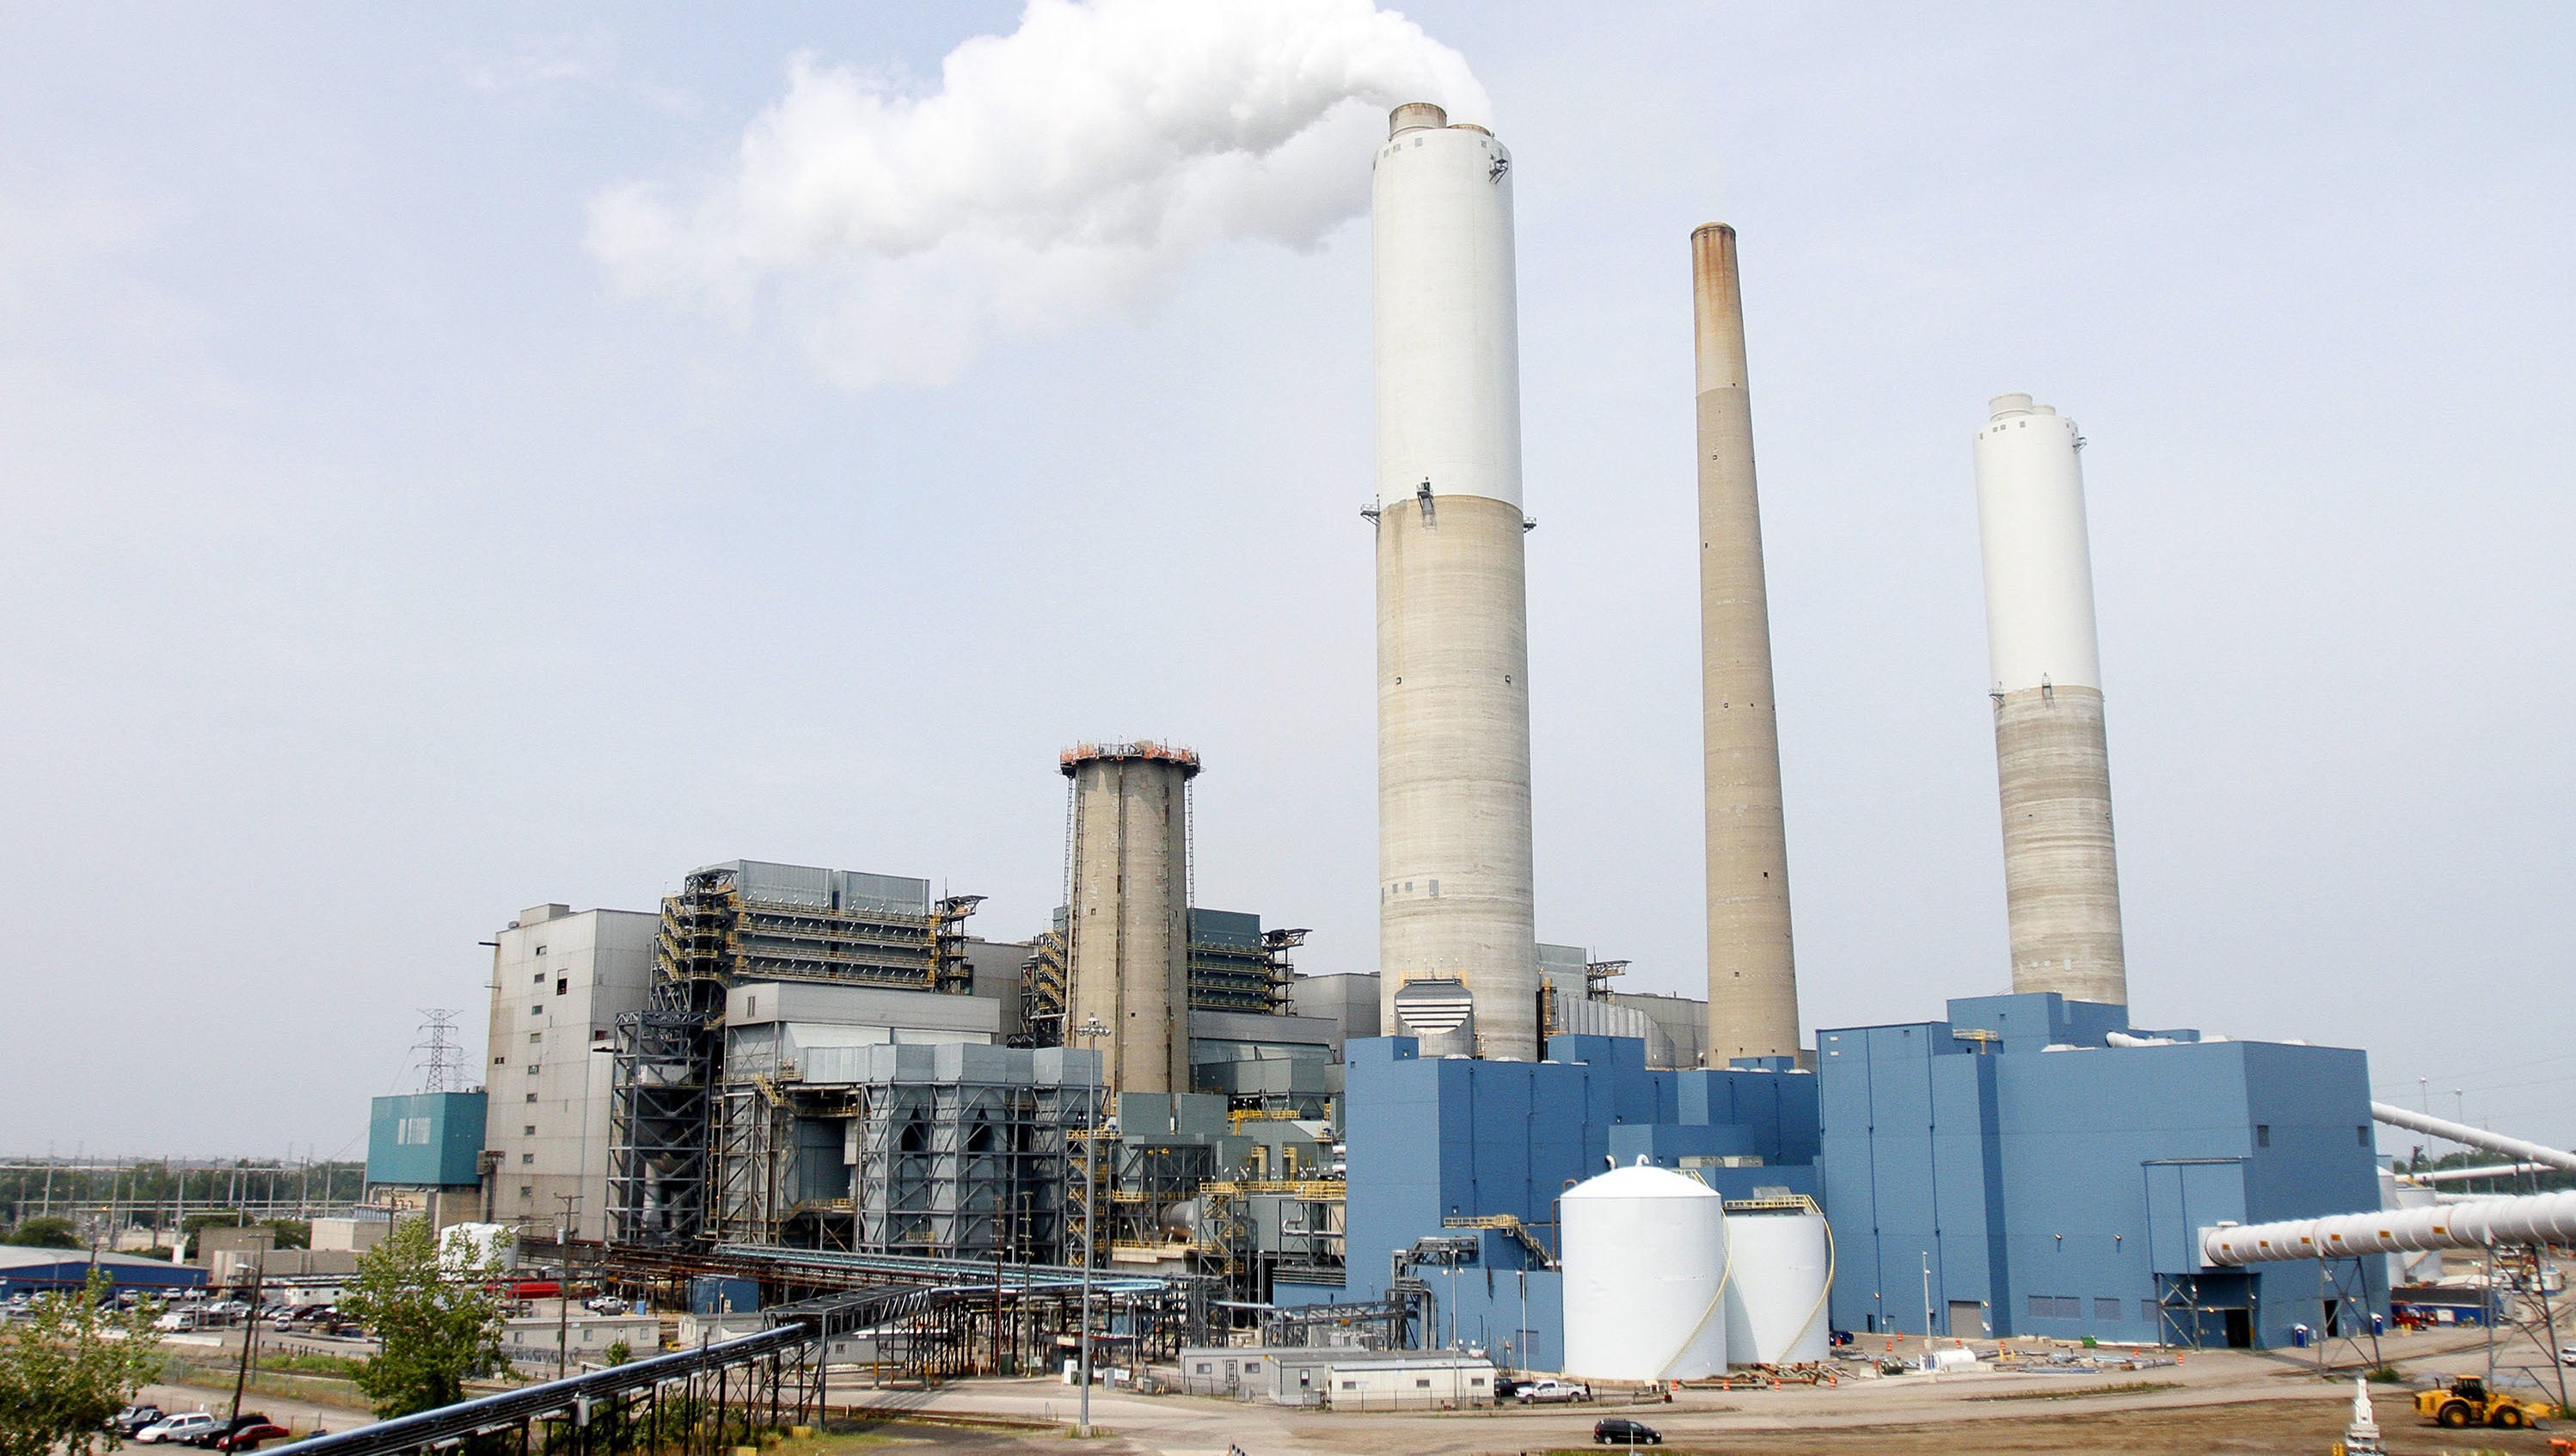 dte-plans-for-no-coal-plants-80-cut-in-carbon-by-2050